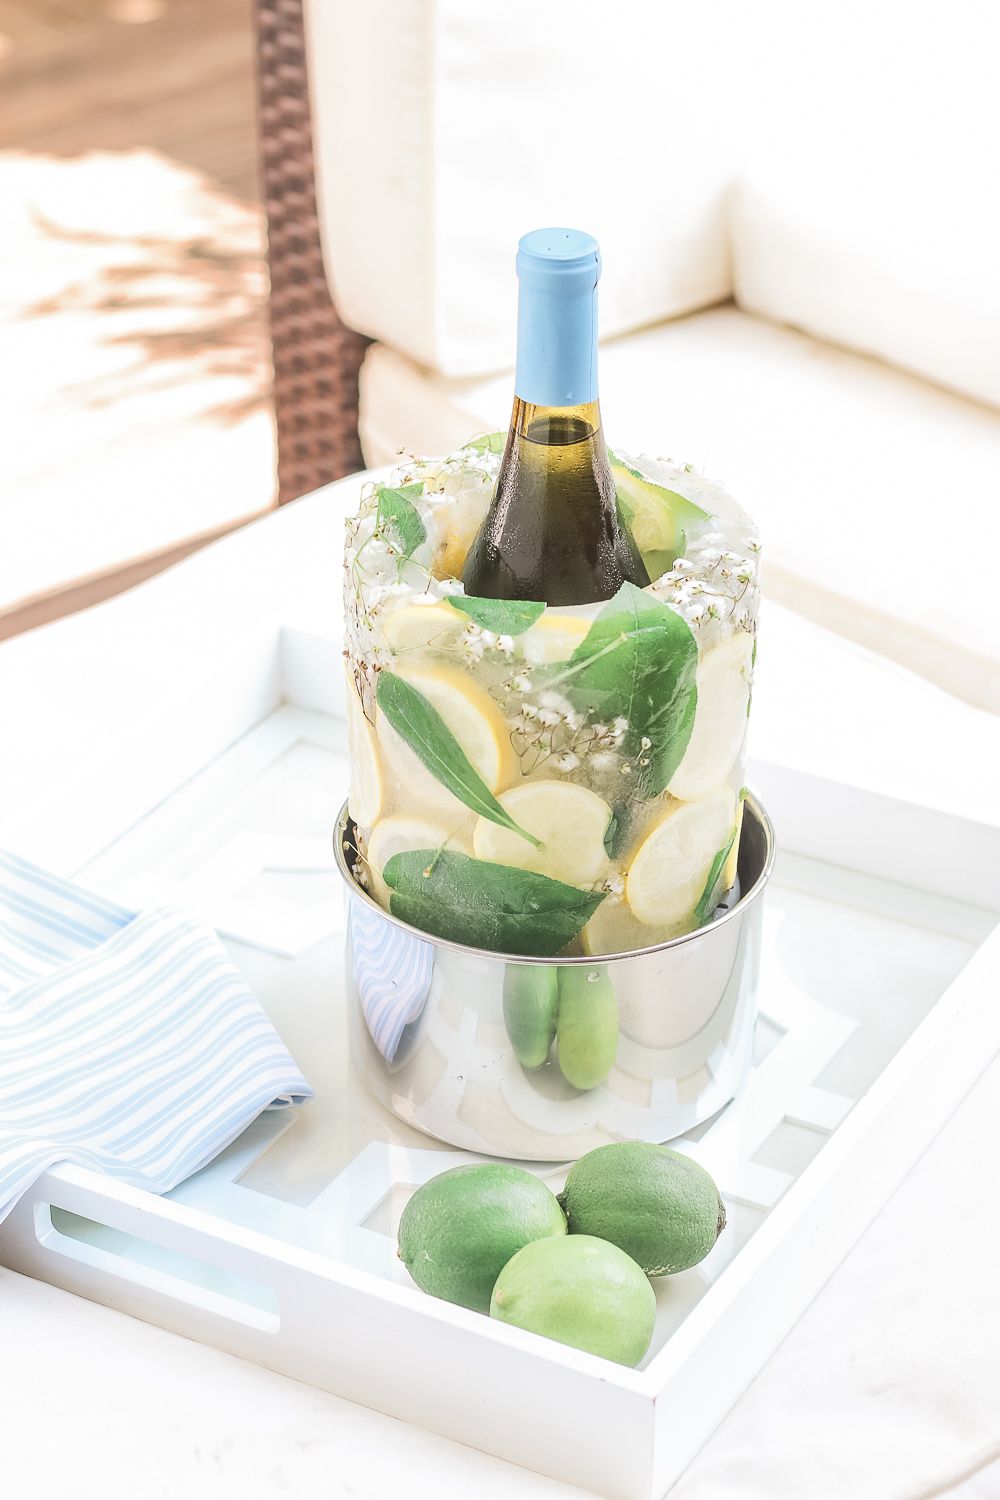 Entertaining blogger Stephanie Ziajka shows how to make your own DIY wine chiller for summer out of lemon slices, greenery, and baby's breath on Diary of a Debutante